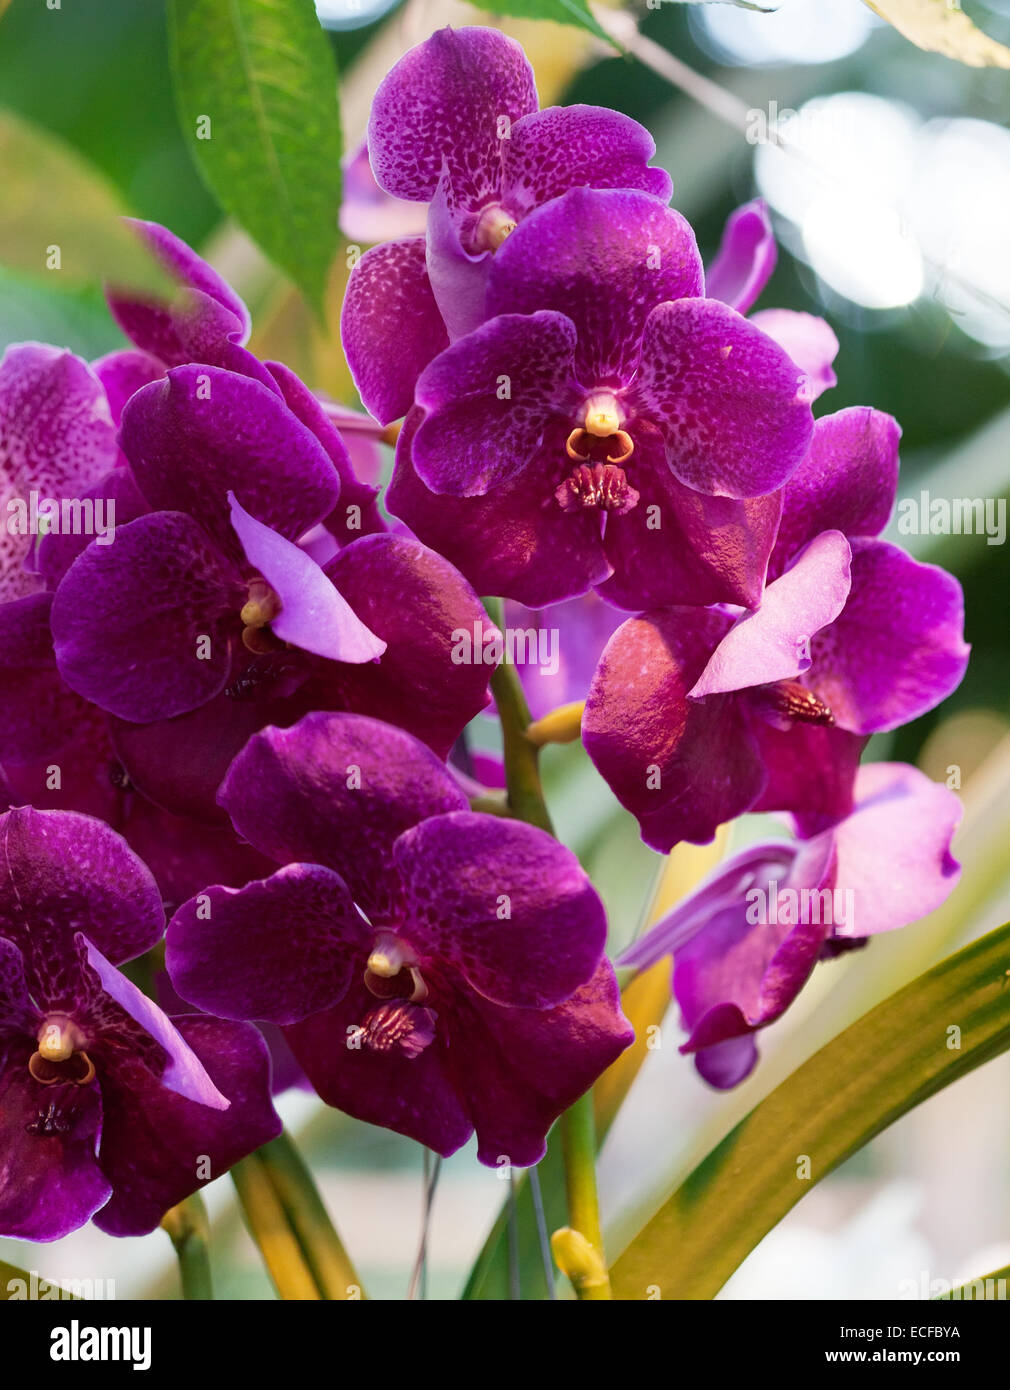 Bright flowers of an orchid vanda close up Stock Photo